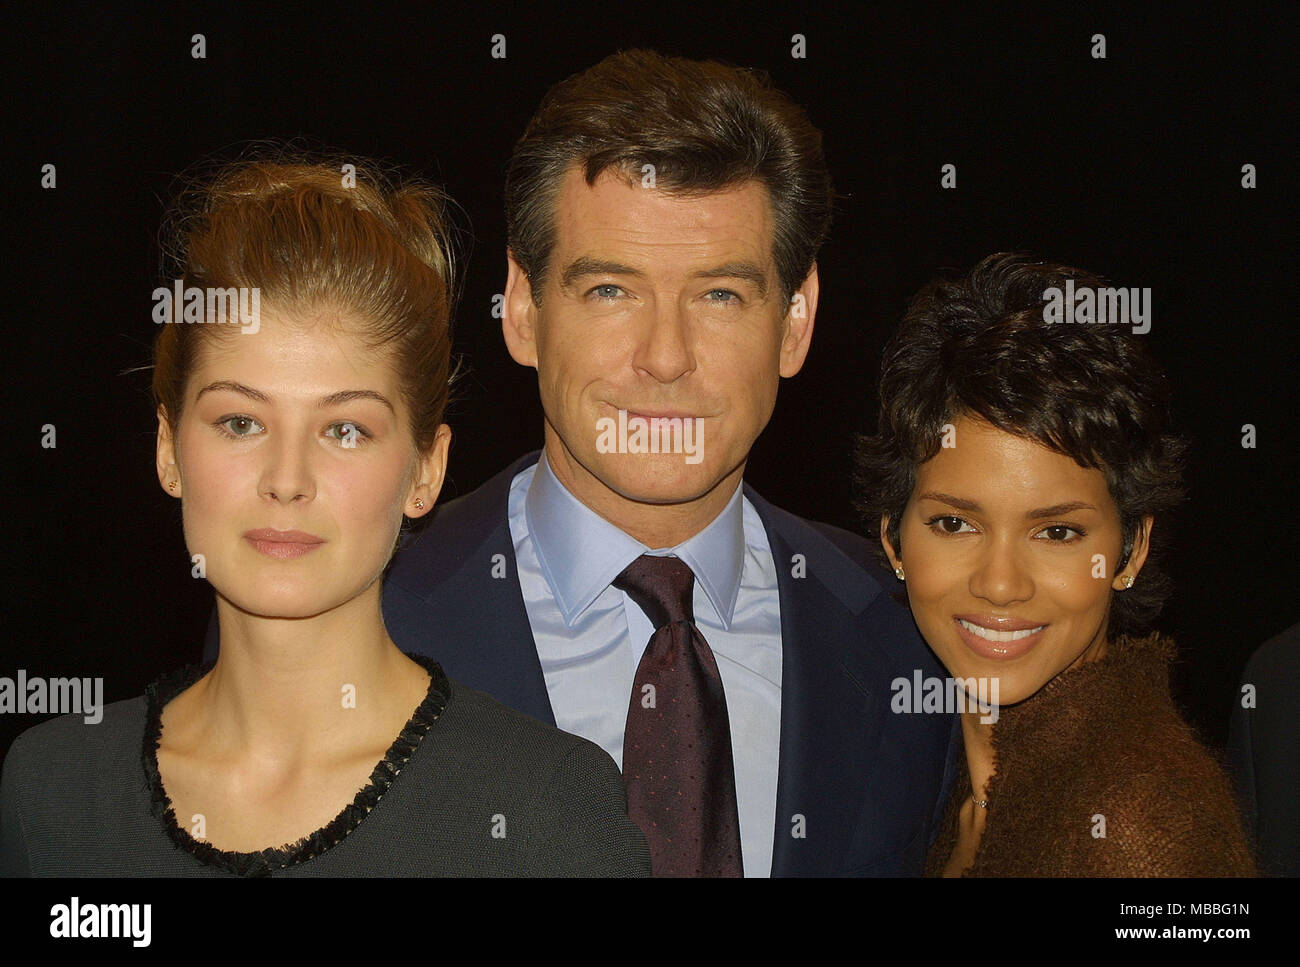 Pierce Brosnan at the Pinewood Studios for the James Bond film Die Another Day  with Rosamund Pike (left) and Halle Berry Stock Photo